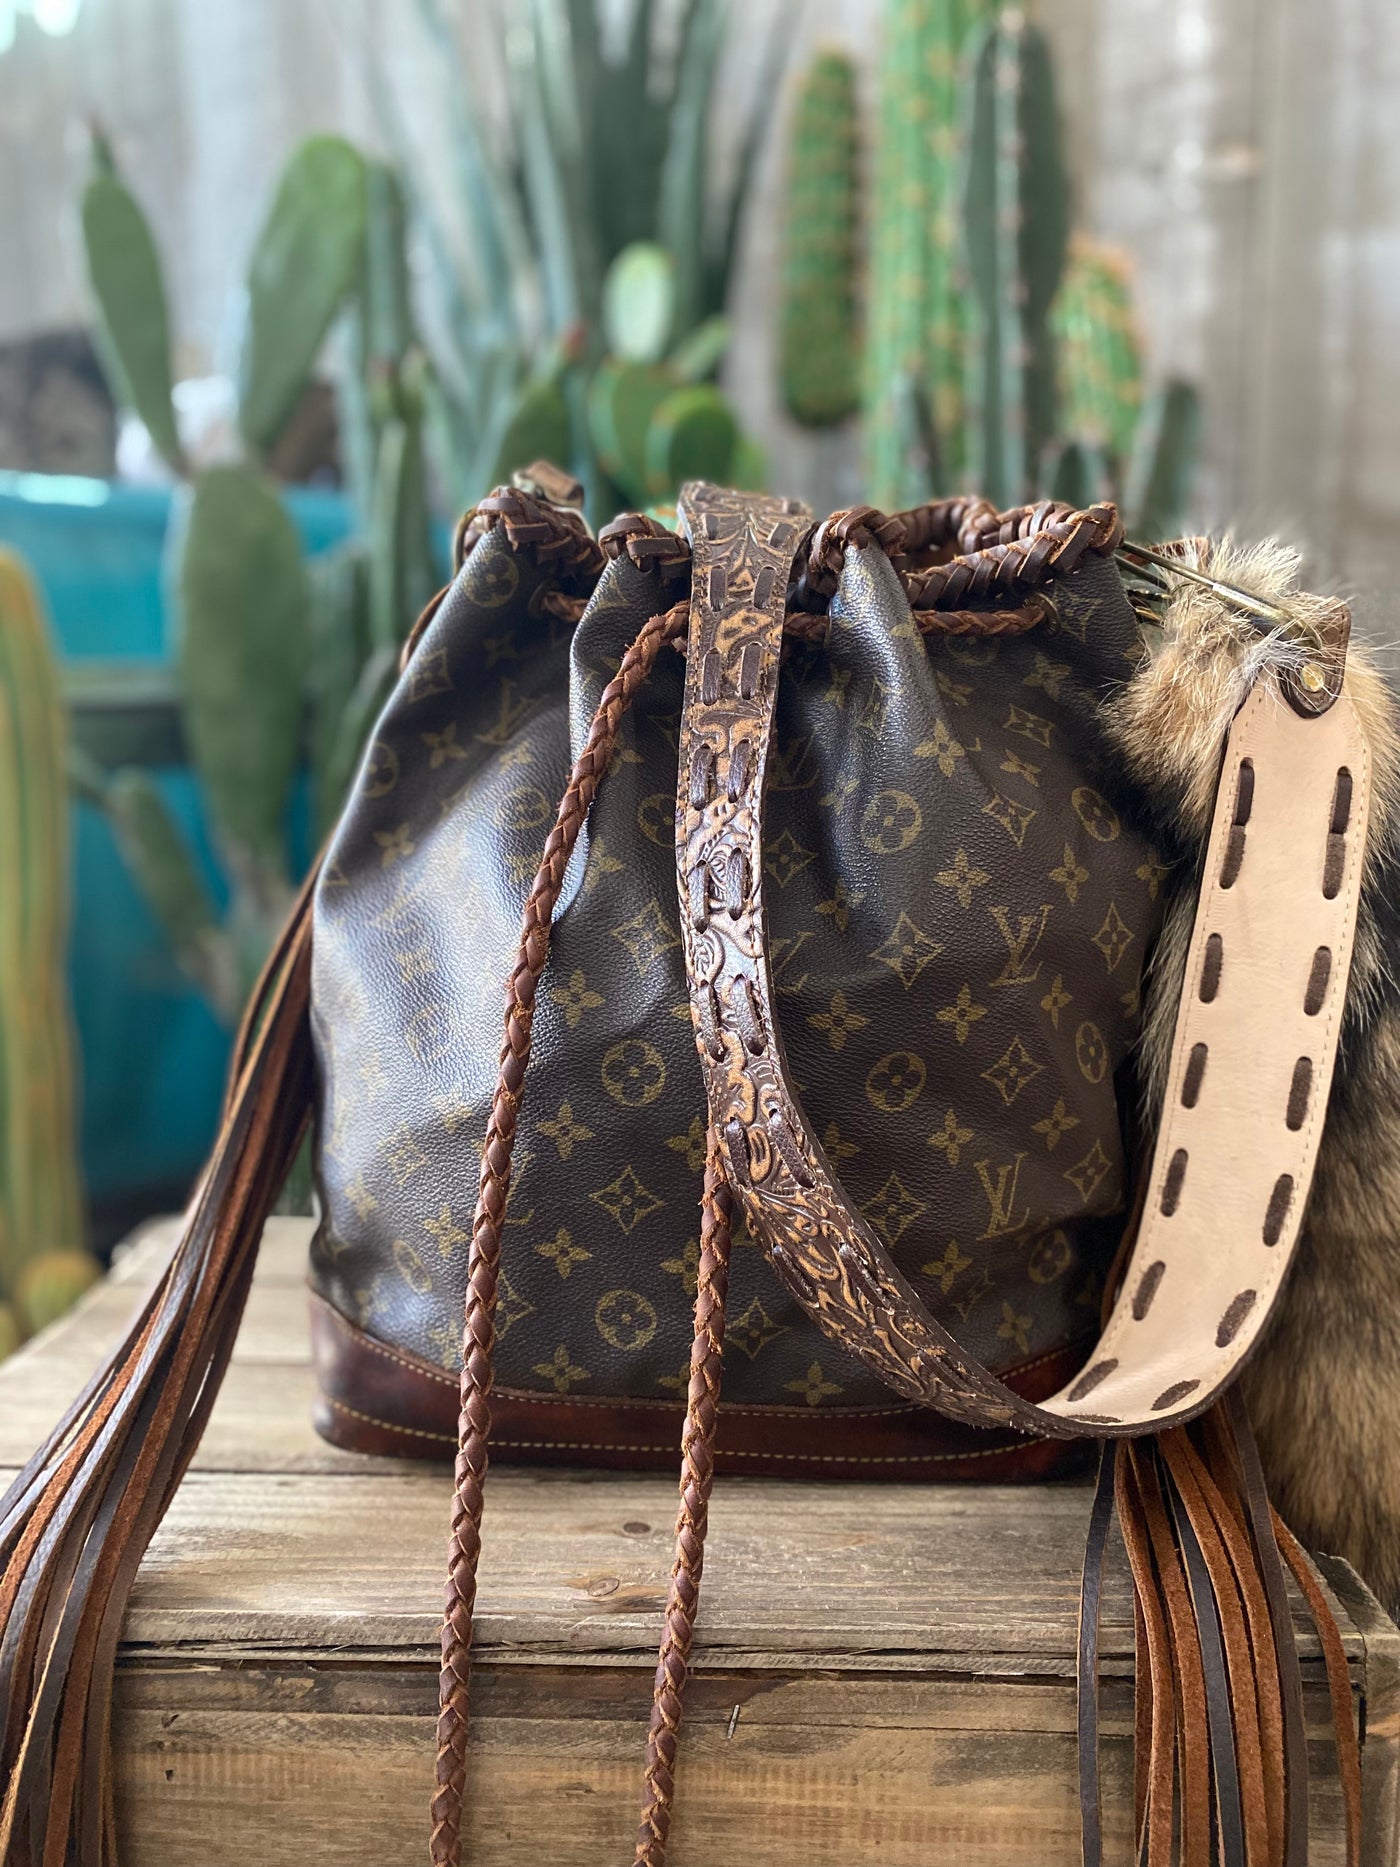 Louis Vuitton Purse With Tooled Leather Purse Strap